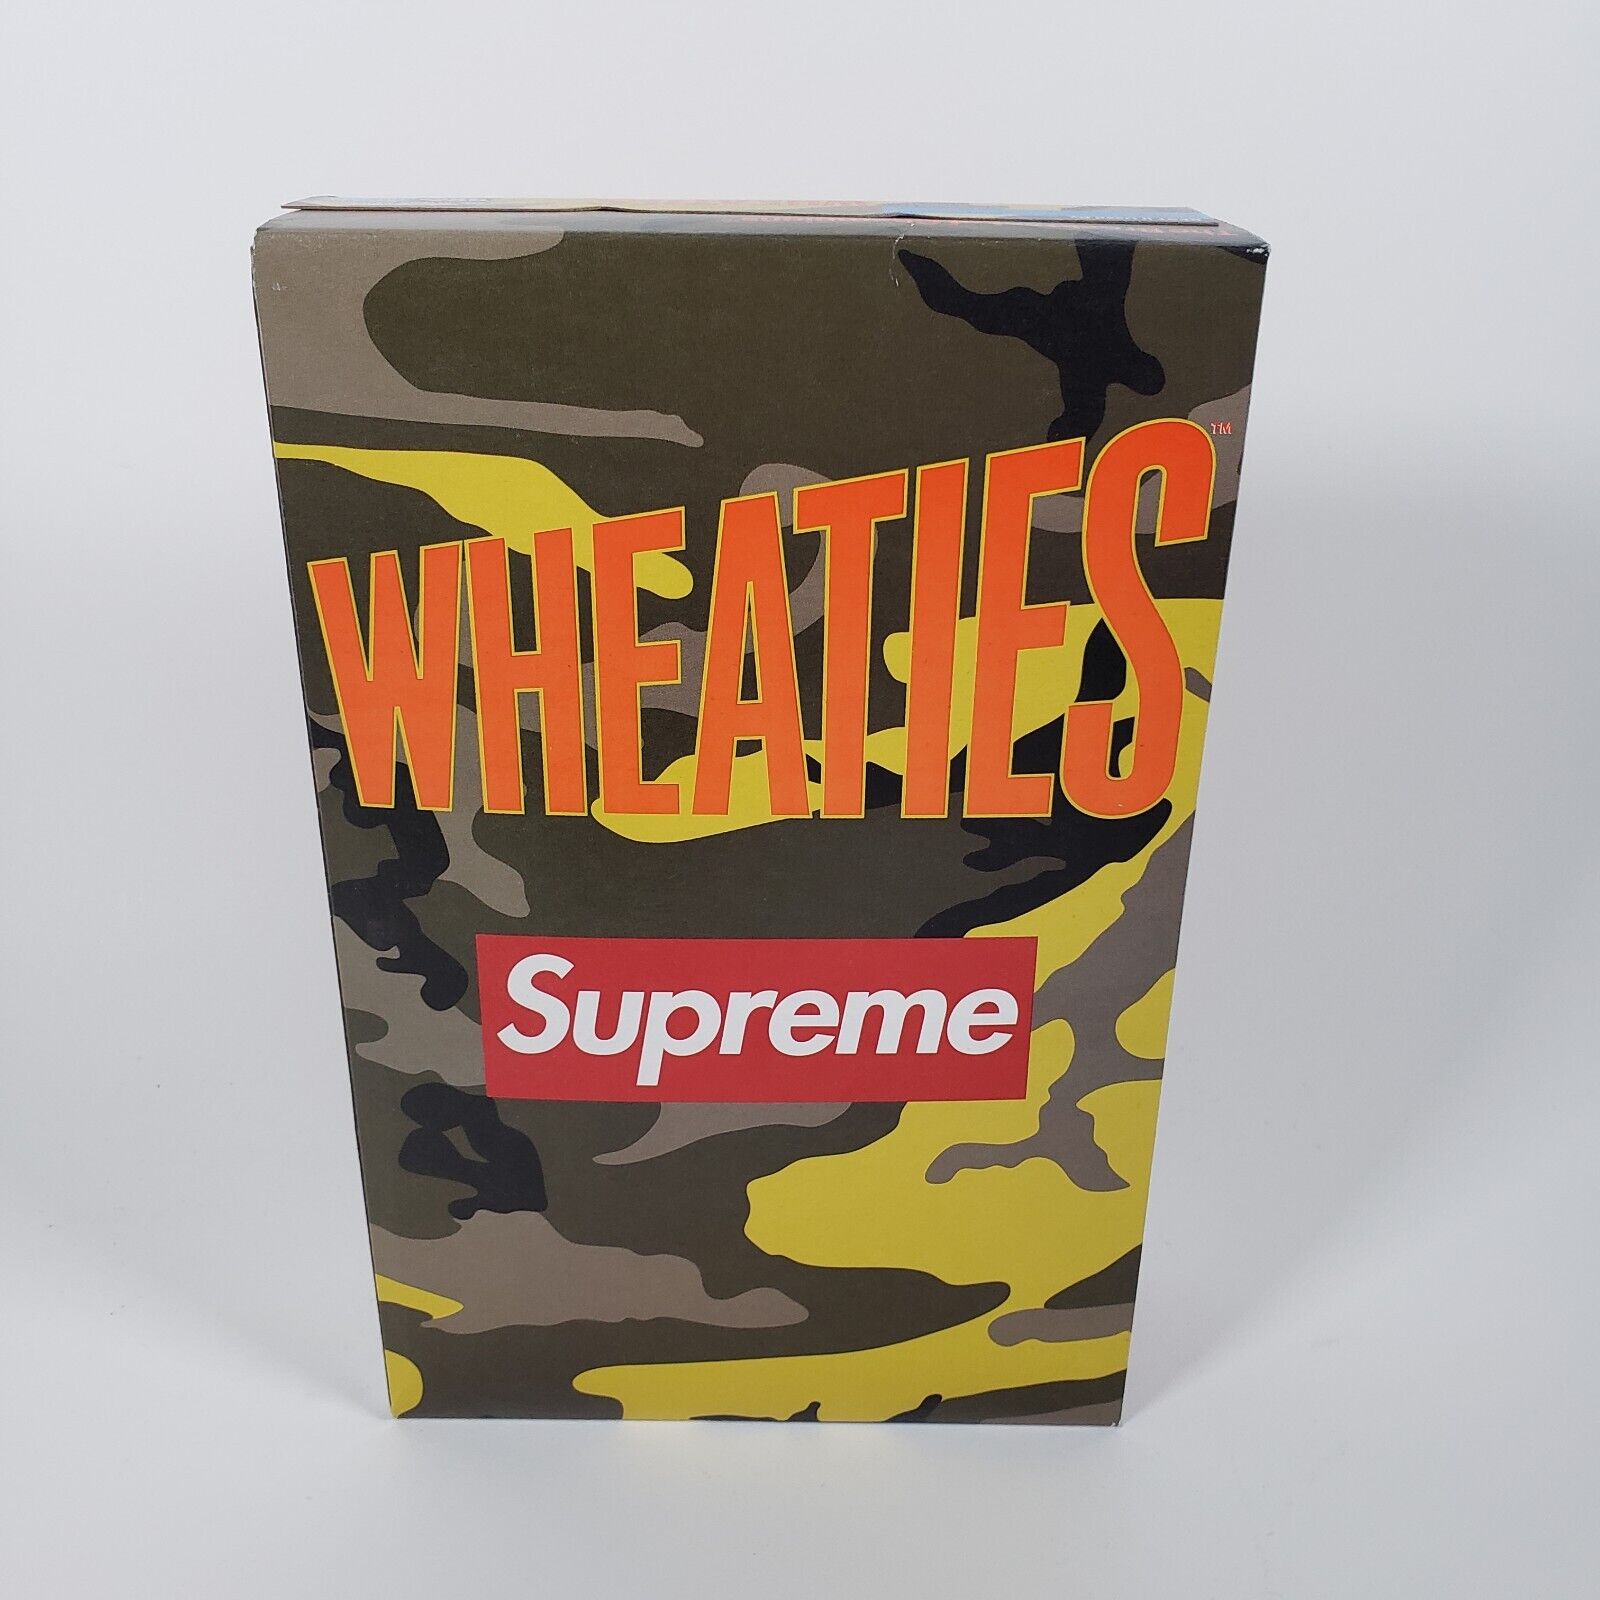 NEW SEALED Supreme Wheaties Cereal Box S/S 2021 Yellow Camo